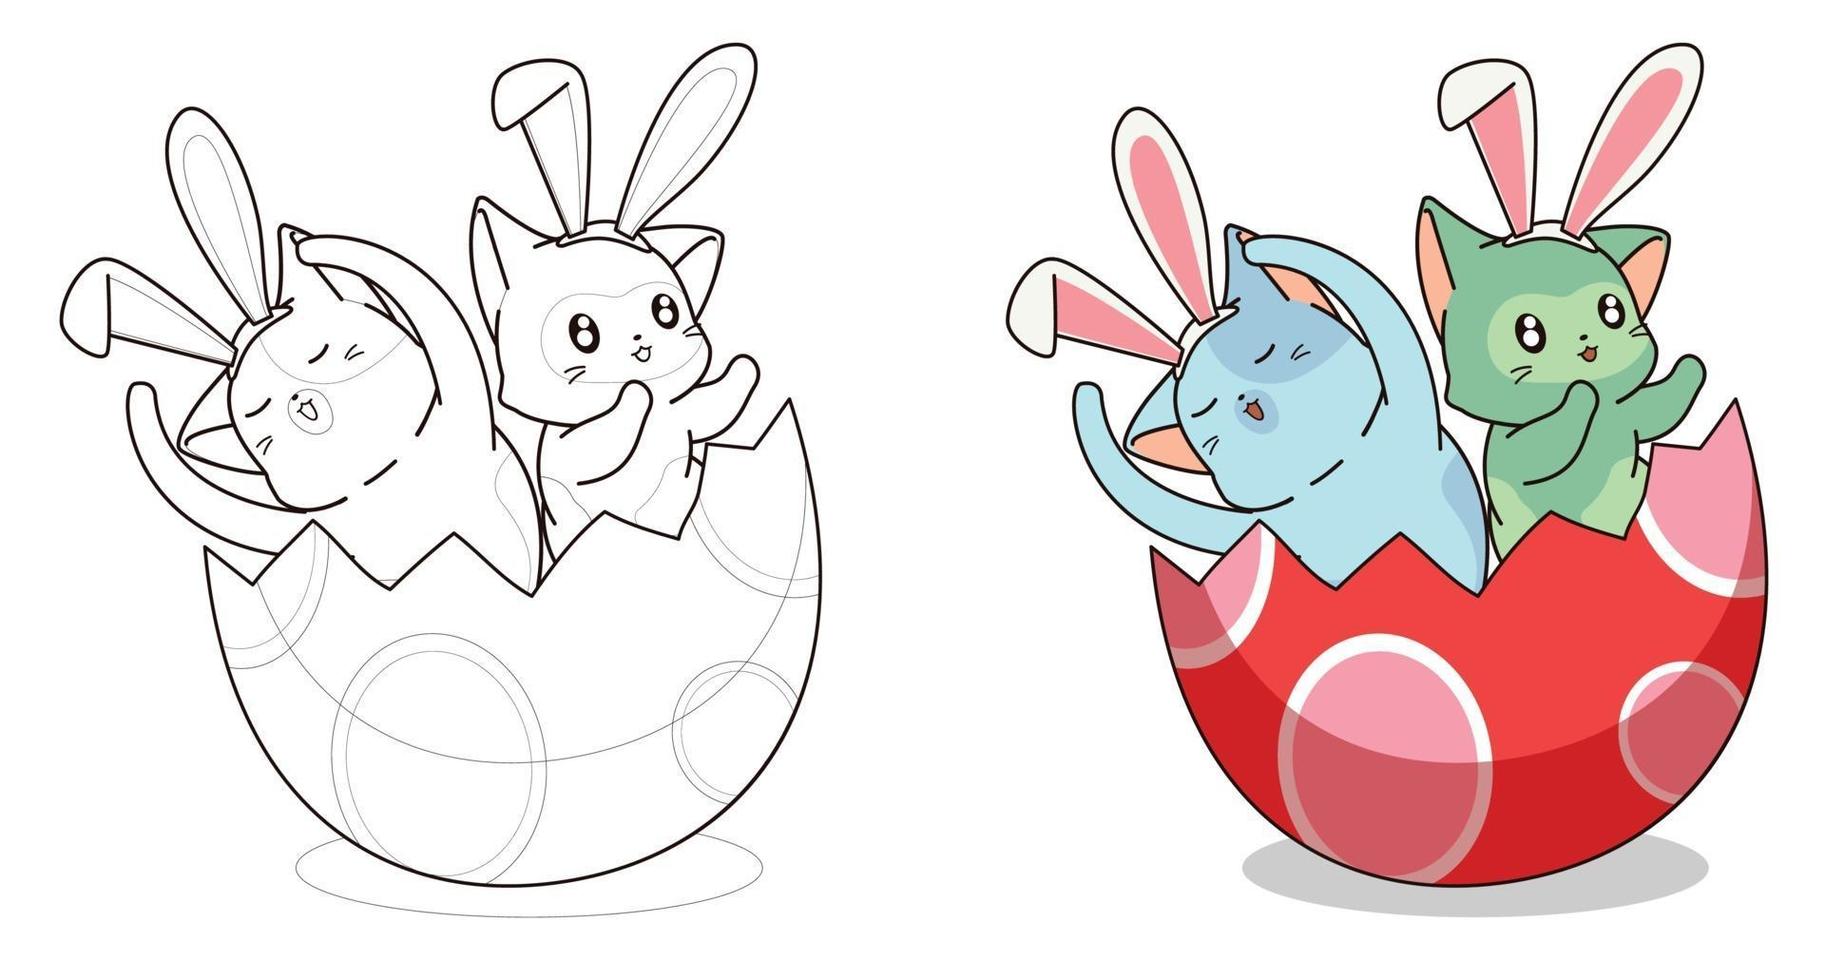 Two bunny cats in the egg cartoon easily coloring page for kids vector